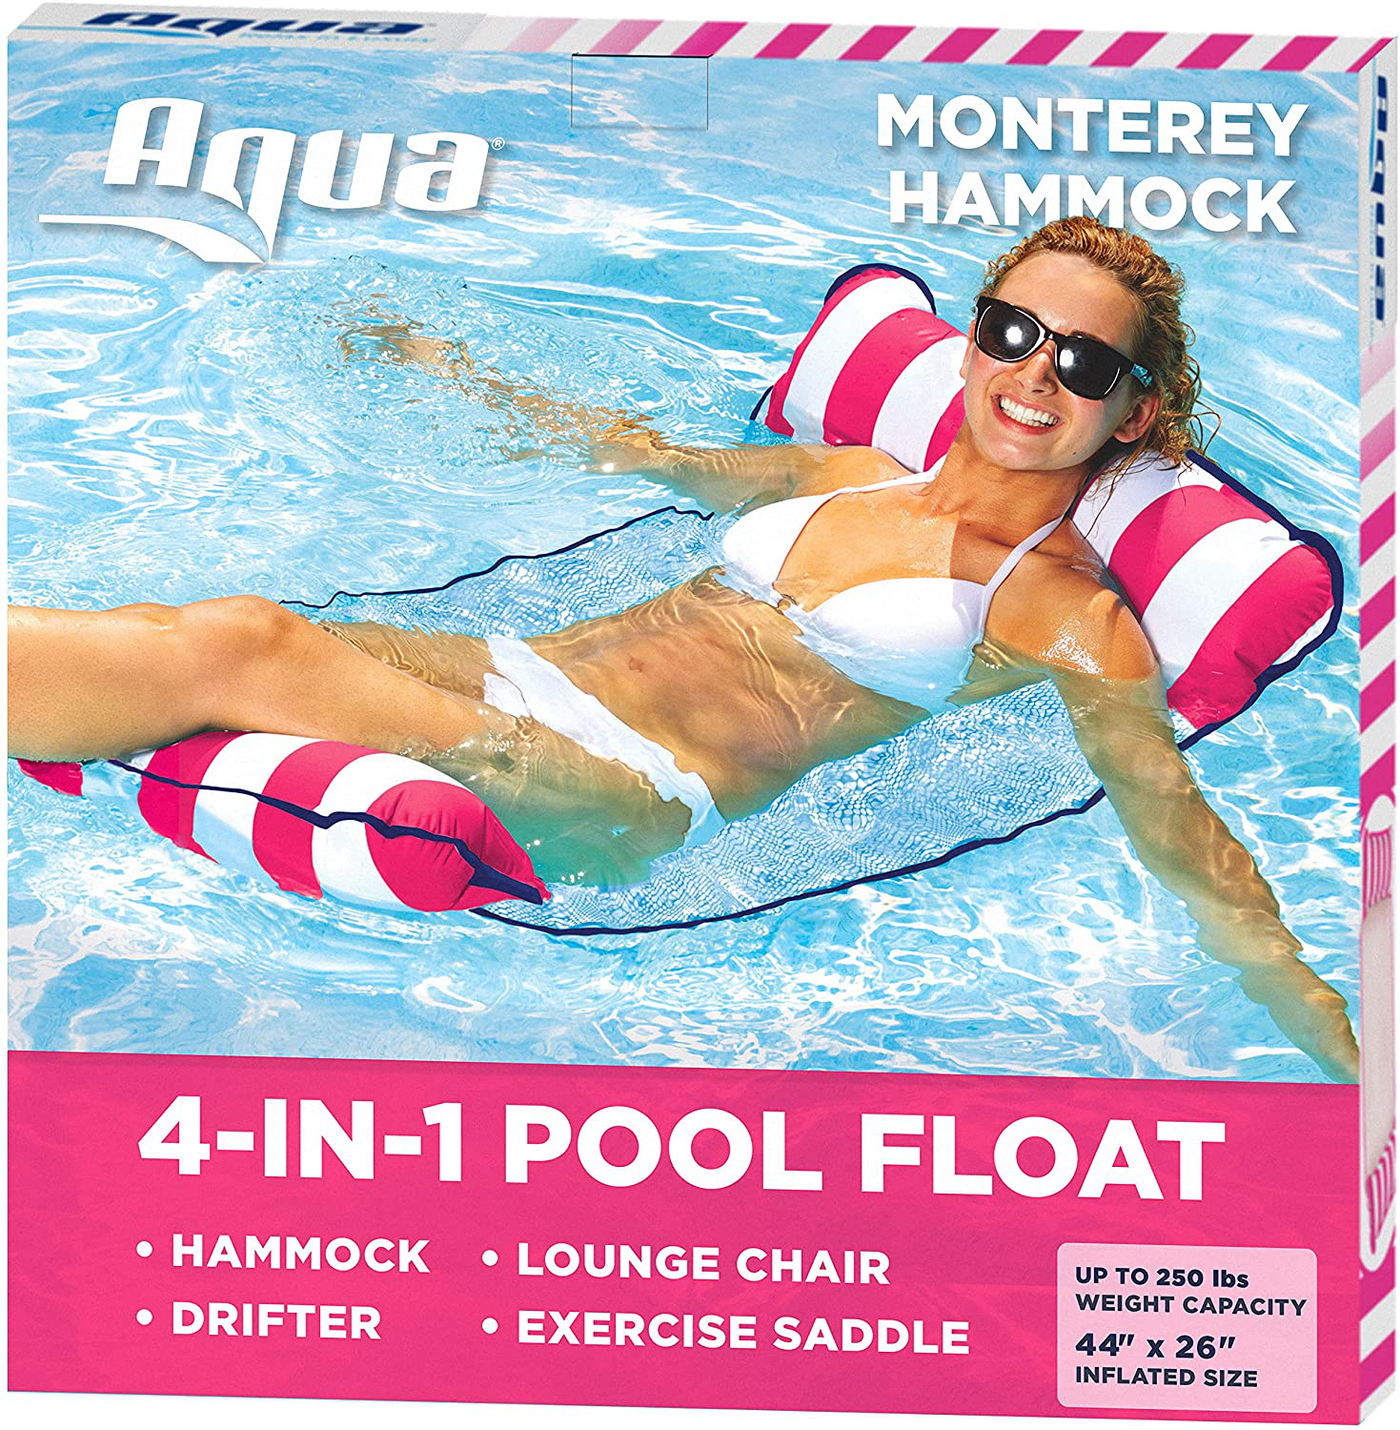 Aqua 4-in-1 Monterey Pool Hammock & Float, 50% Thicker, Patented Non-Stick PVC, Multi-Purpose Water Hammock (Saddle, Chair, Hammock, Drifter) Pool Chair for Adults - Pink